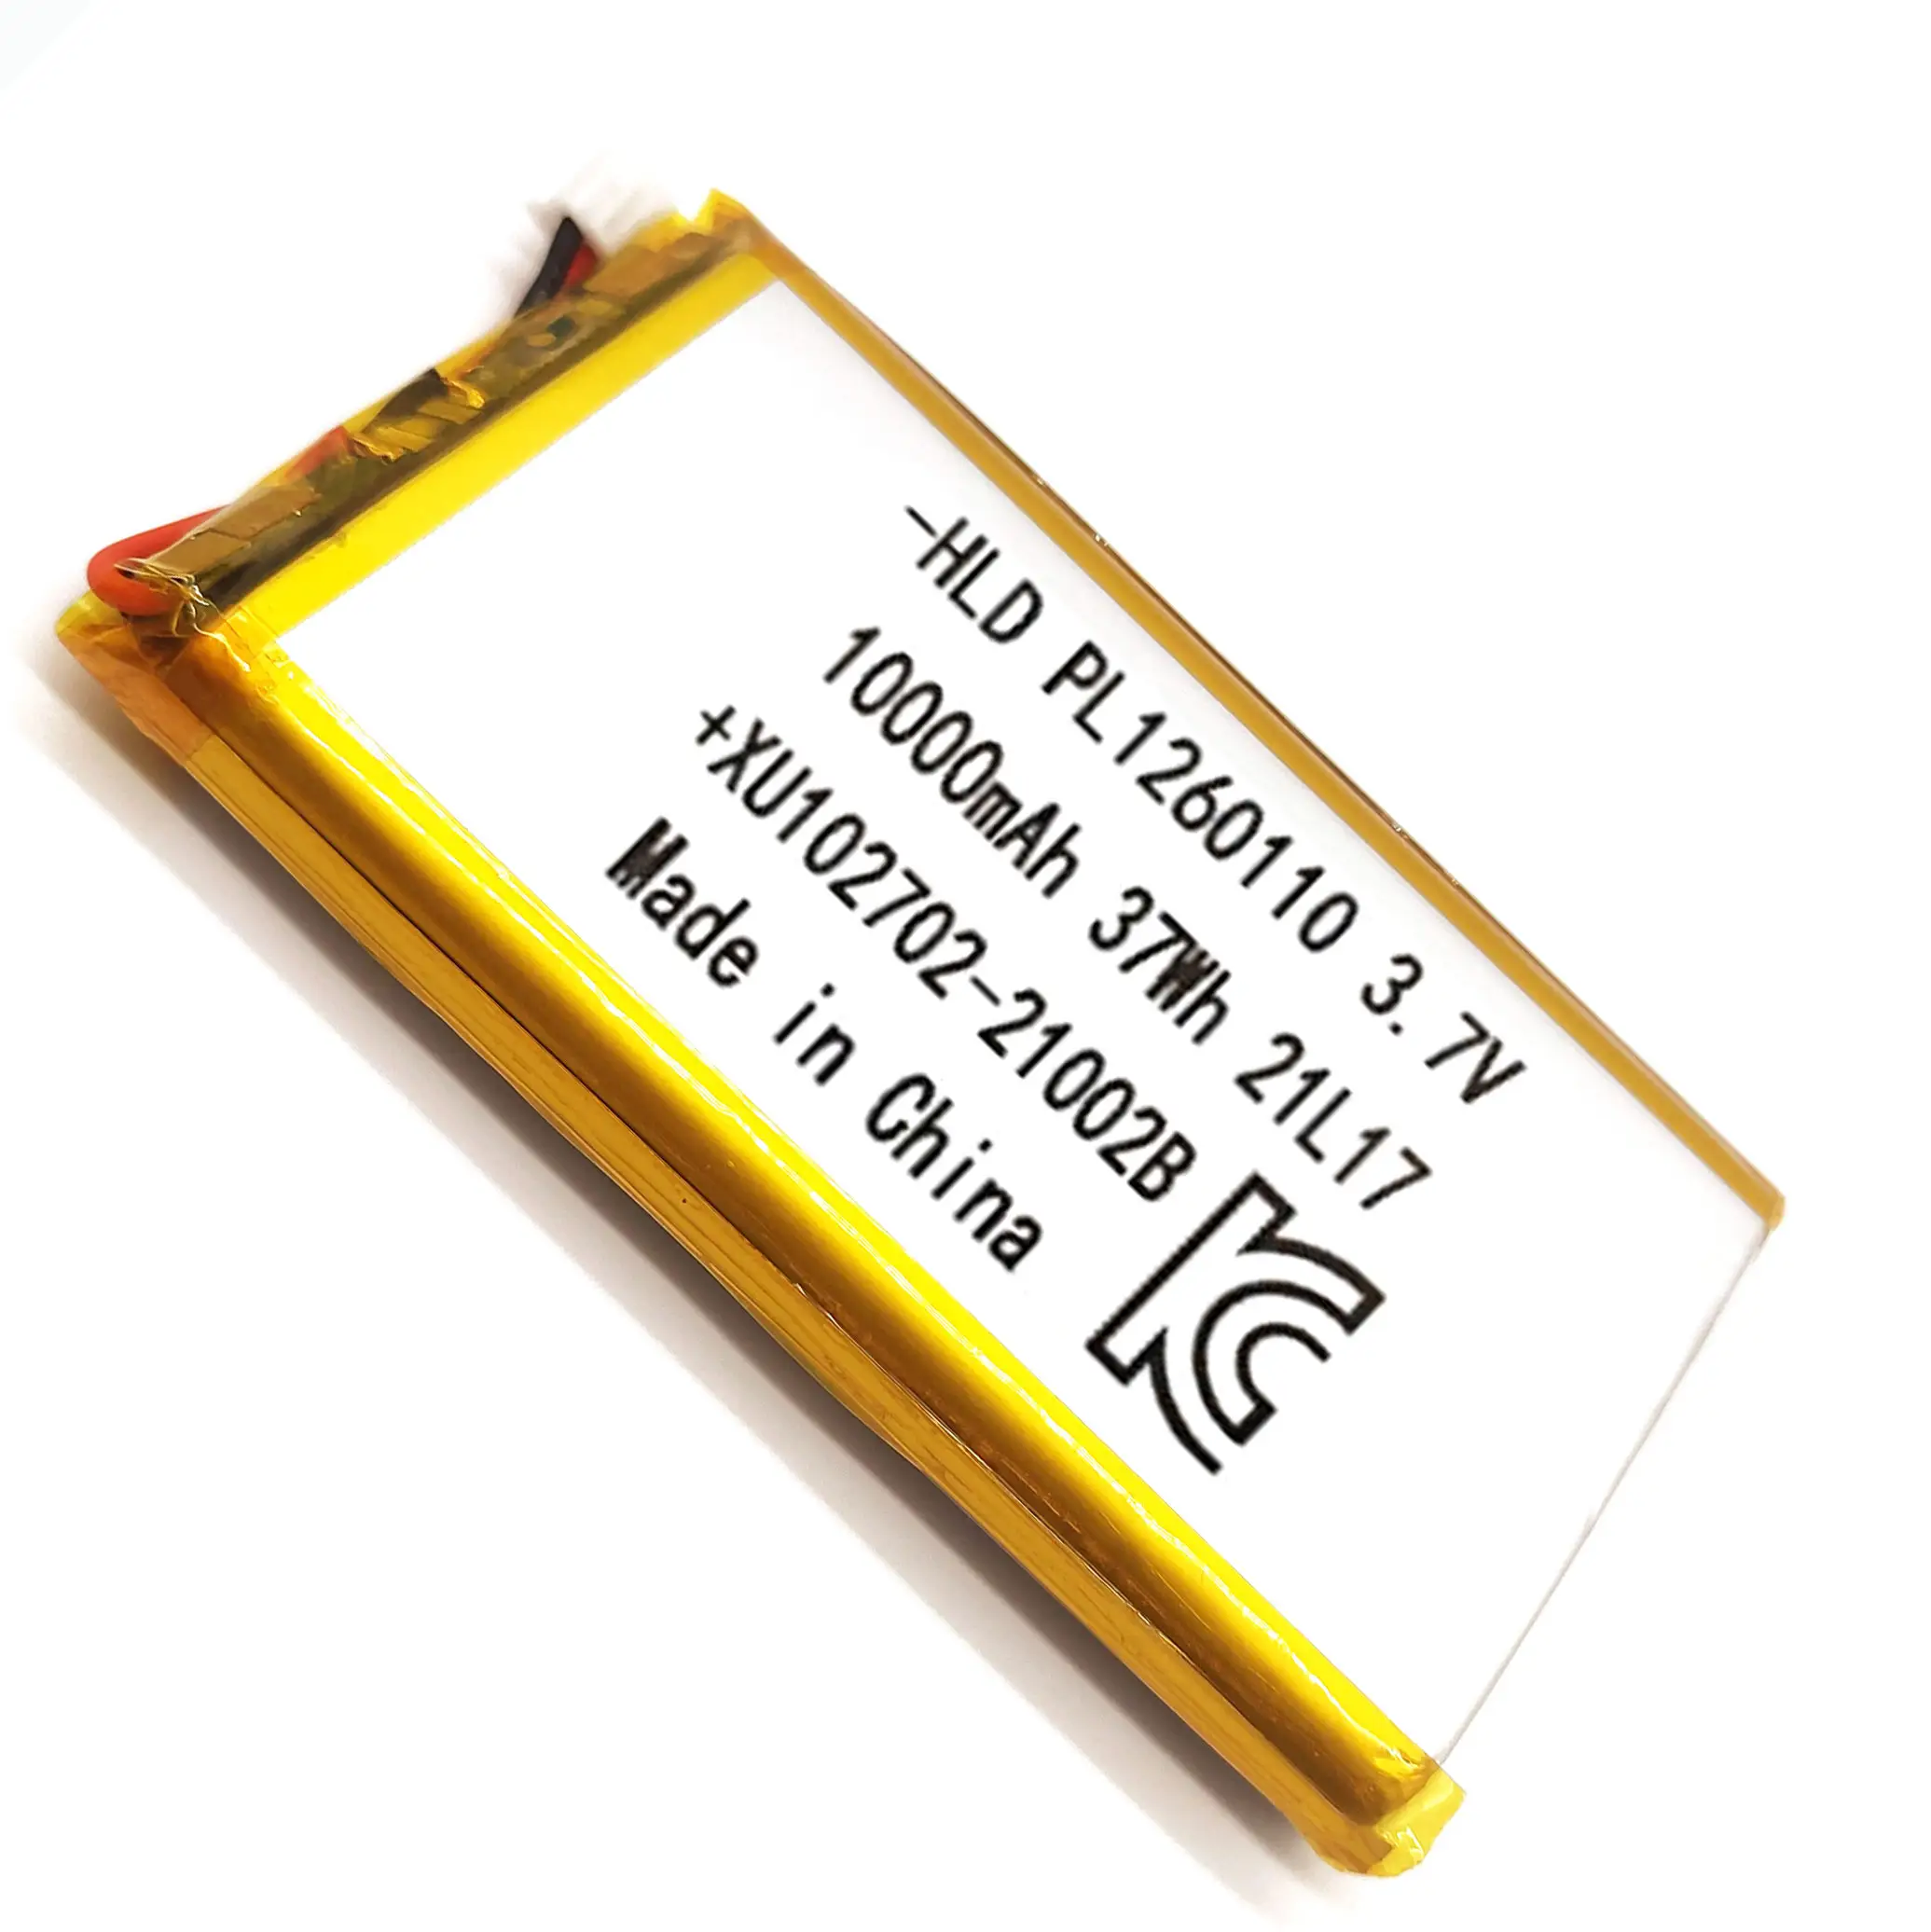 Kc Certified 1260110 Rechargeable Big Lipo 3.7 V 10000Mah Charging Ternary Lipo Lithium Polymer Battery For Power Bank